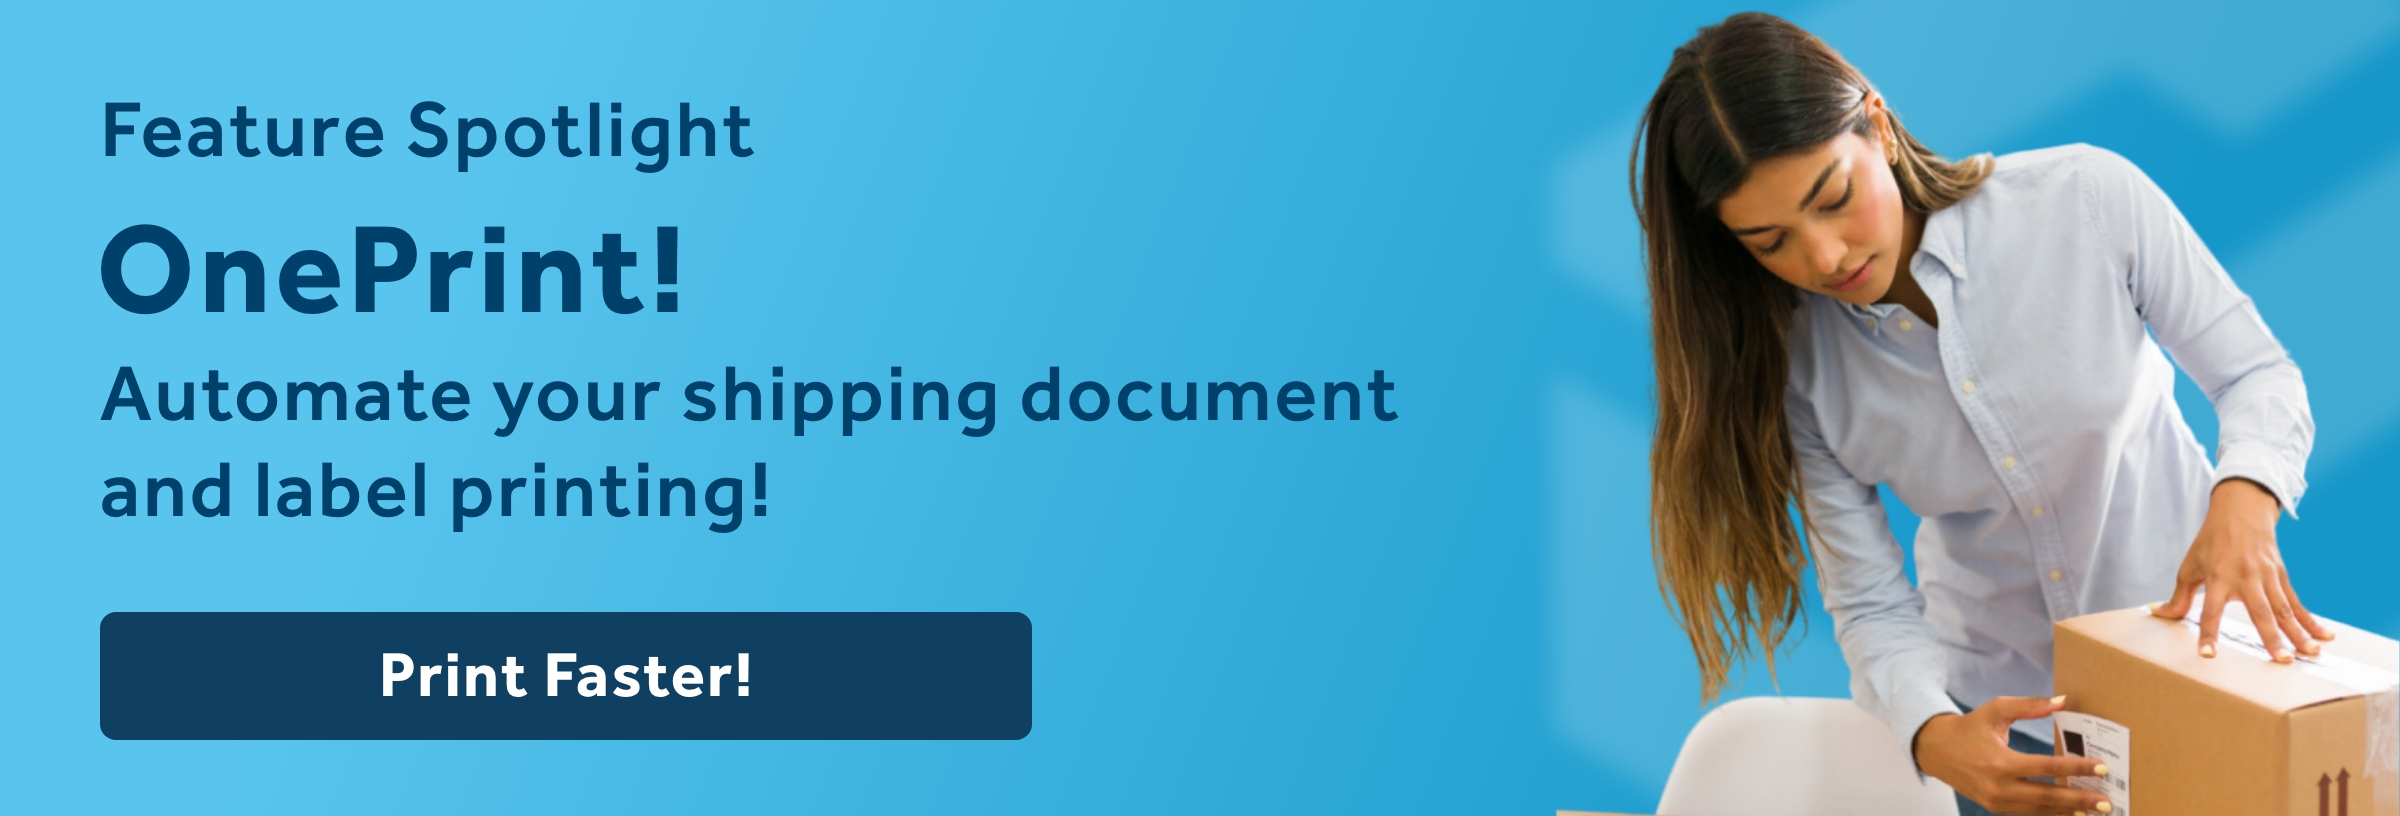 fast-shipping-document-printing-with-OnePrint-by -ClickShip